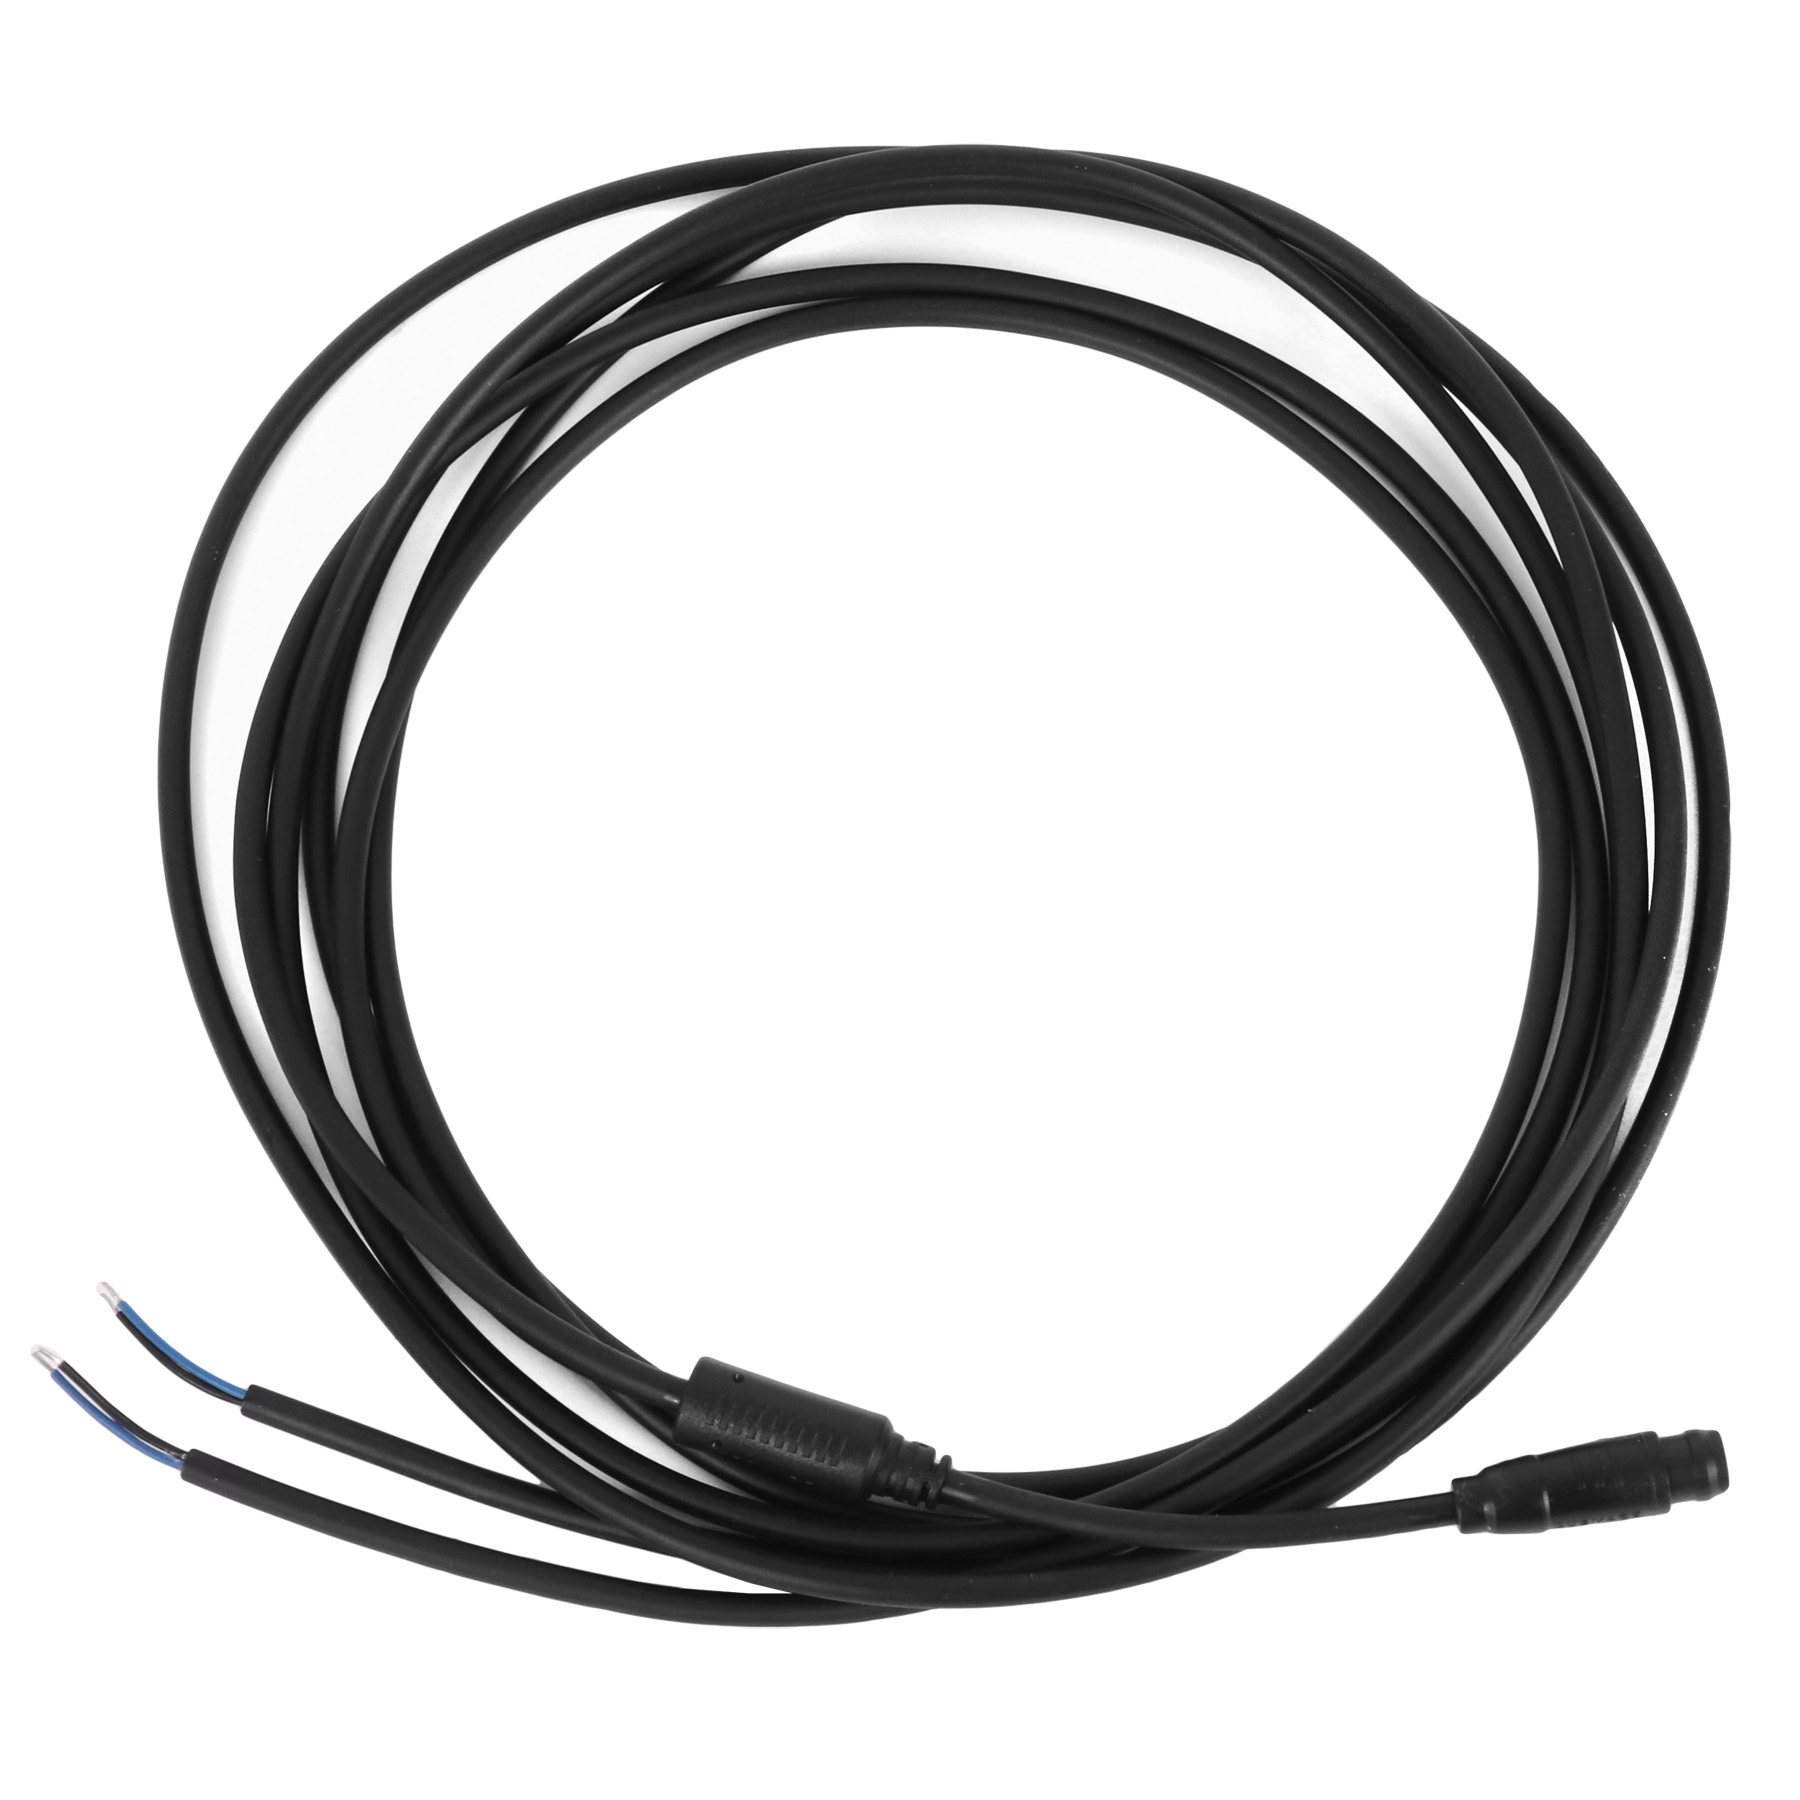 Picture of Simplon ebikemotion Light Cable - EBM WIRE L2